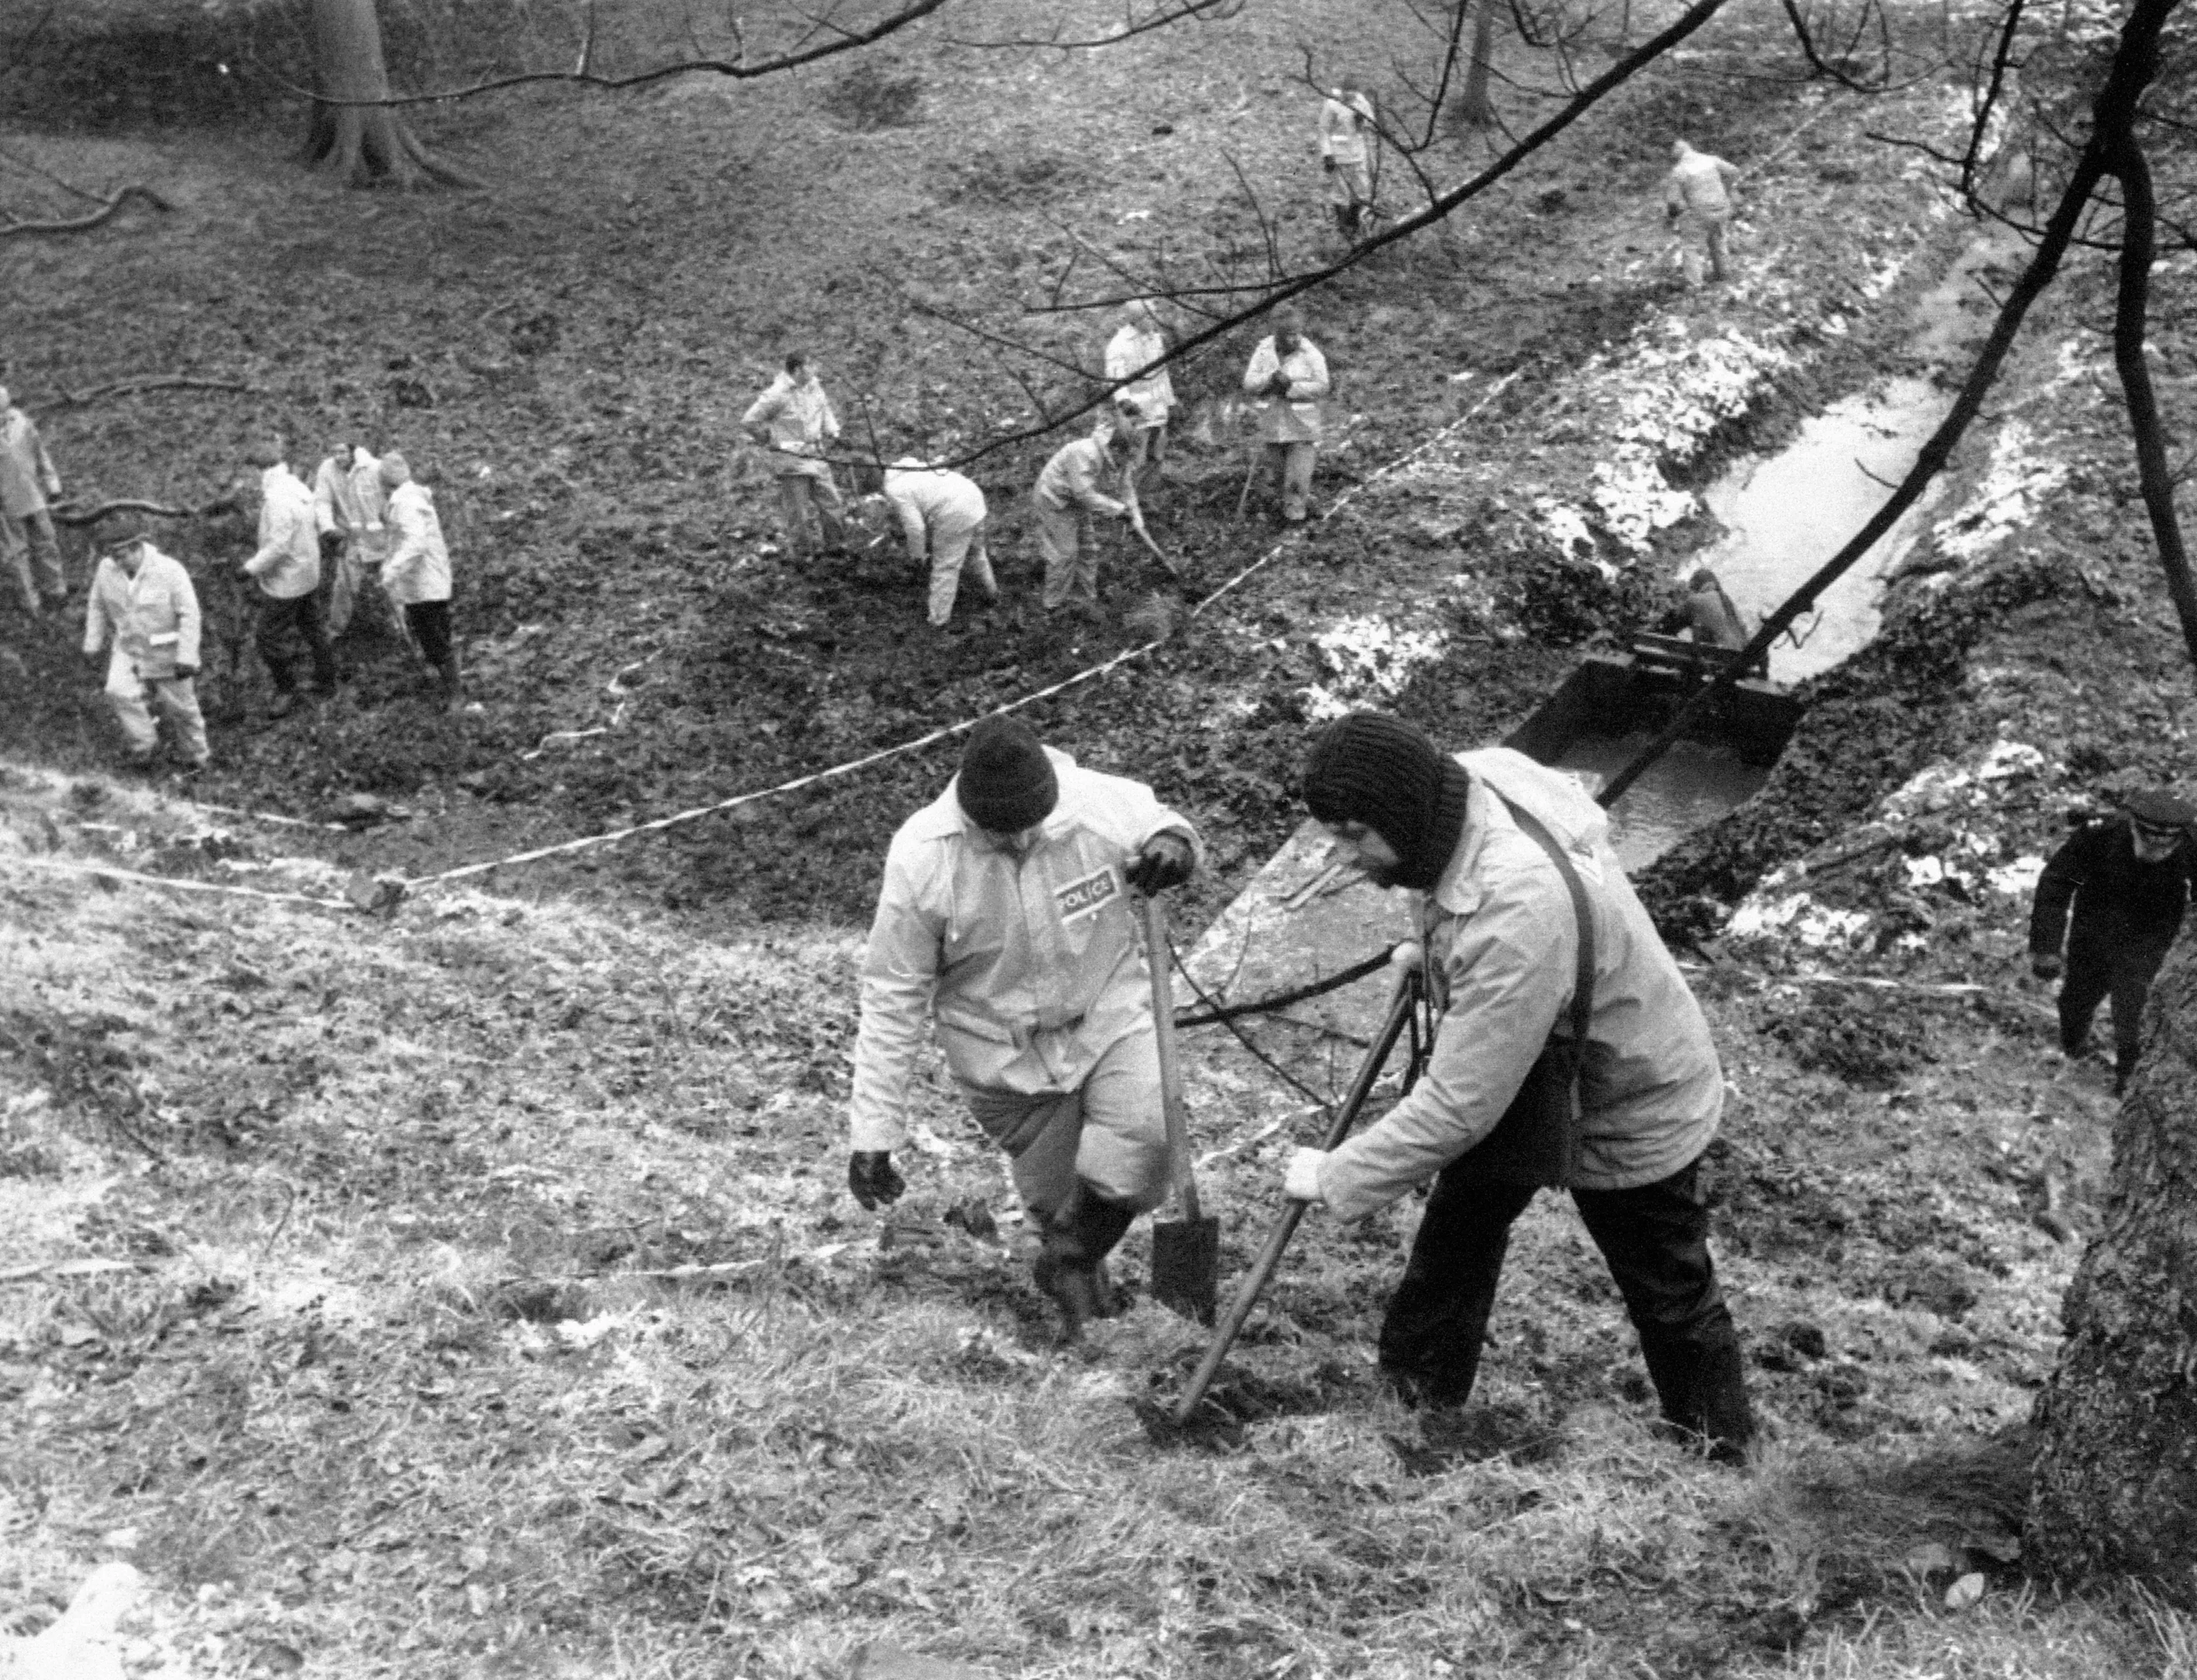 Police searching woodland near Sutcliffe's home in 1981.